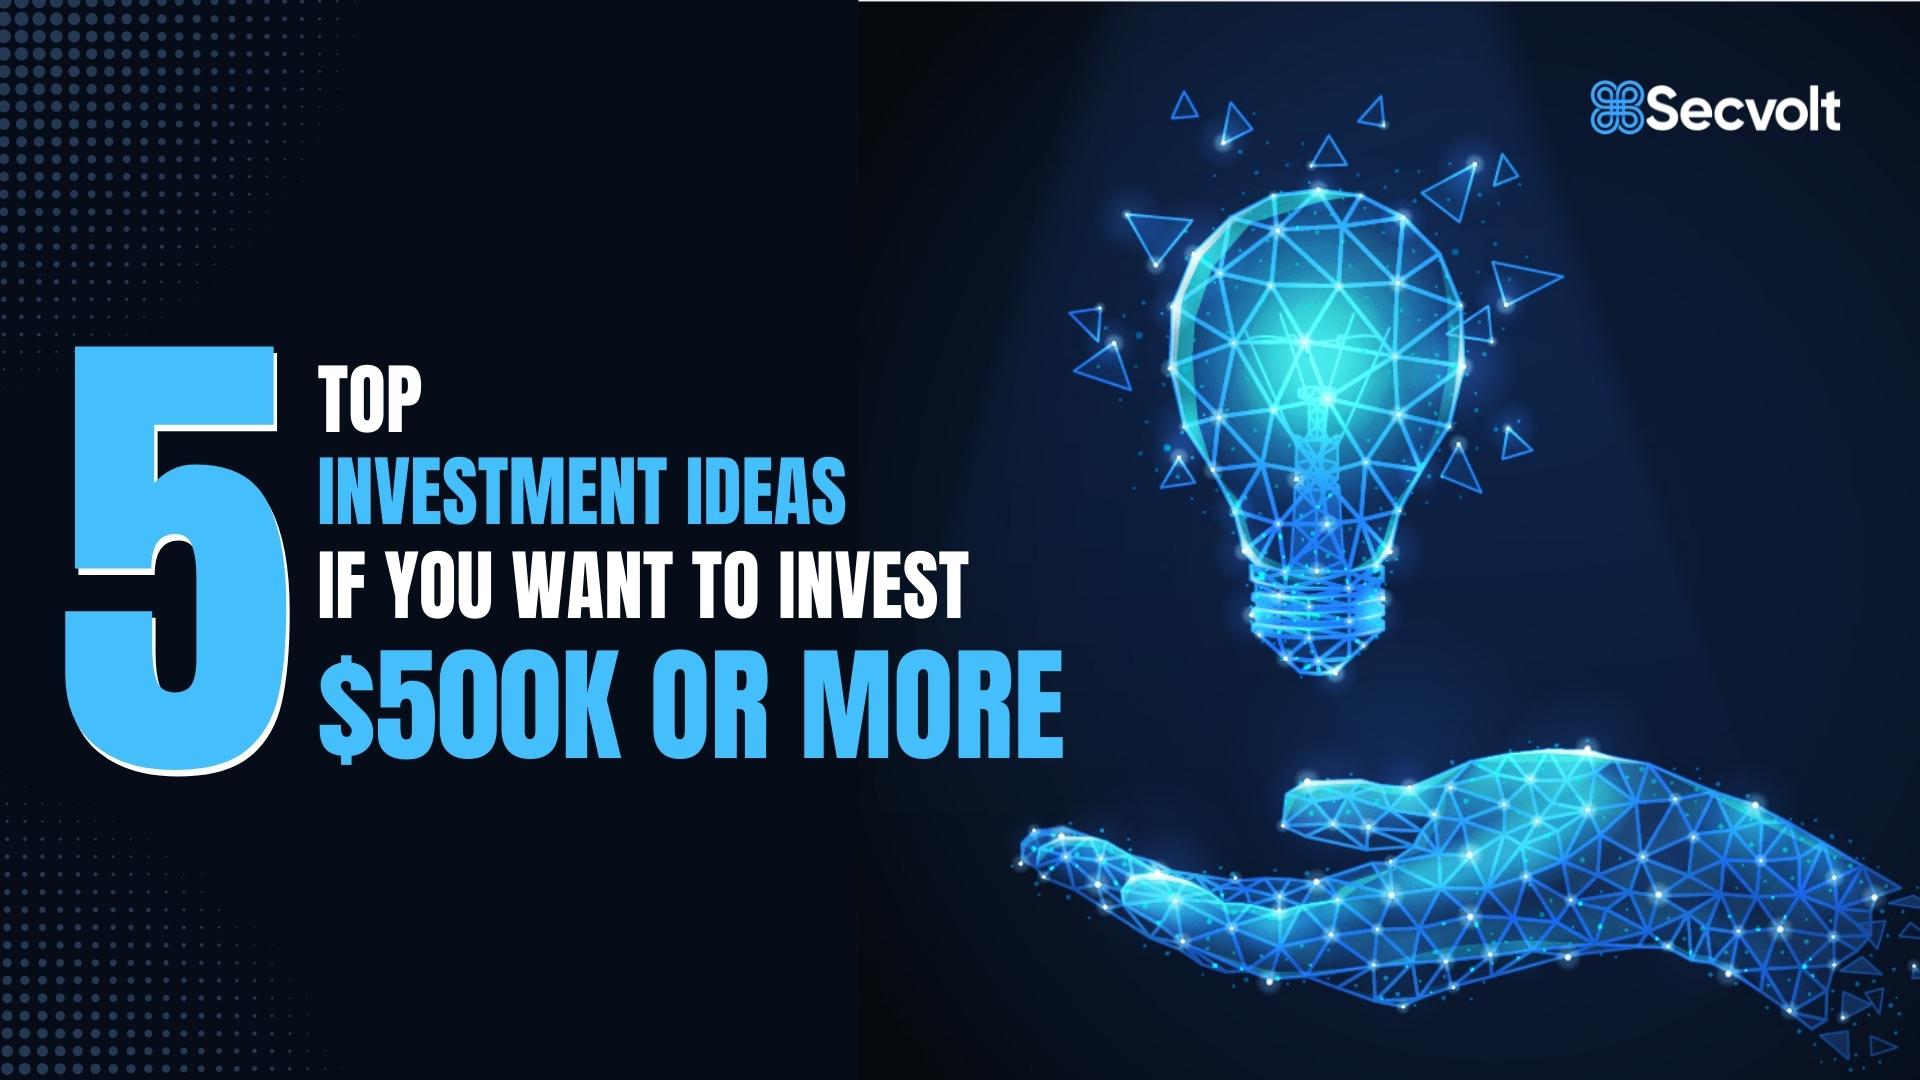 invest 500K - top 5 investment ideas for 500000 USD